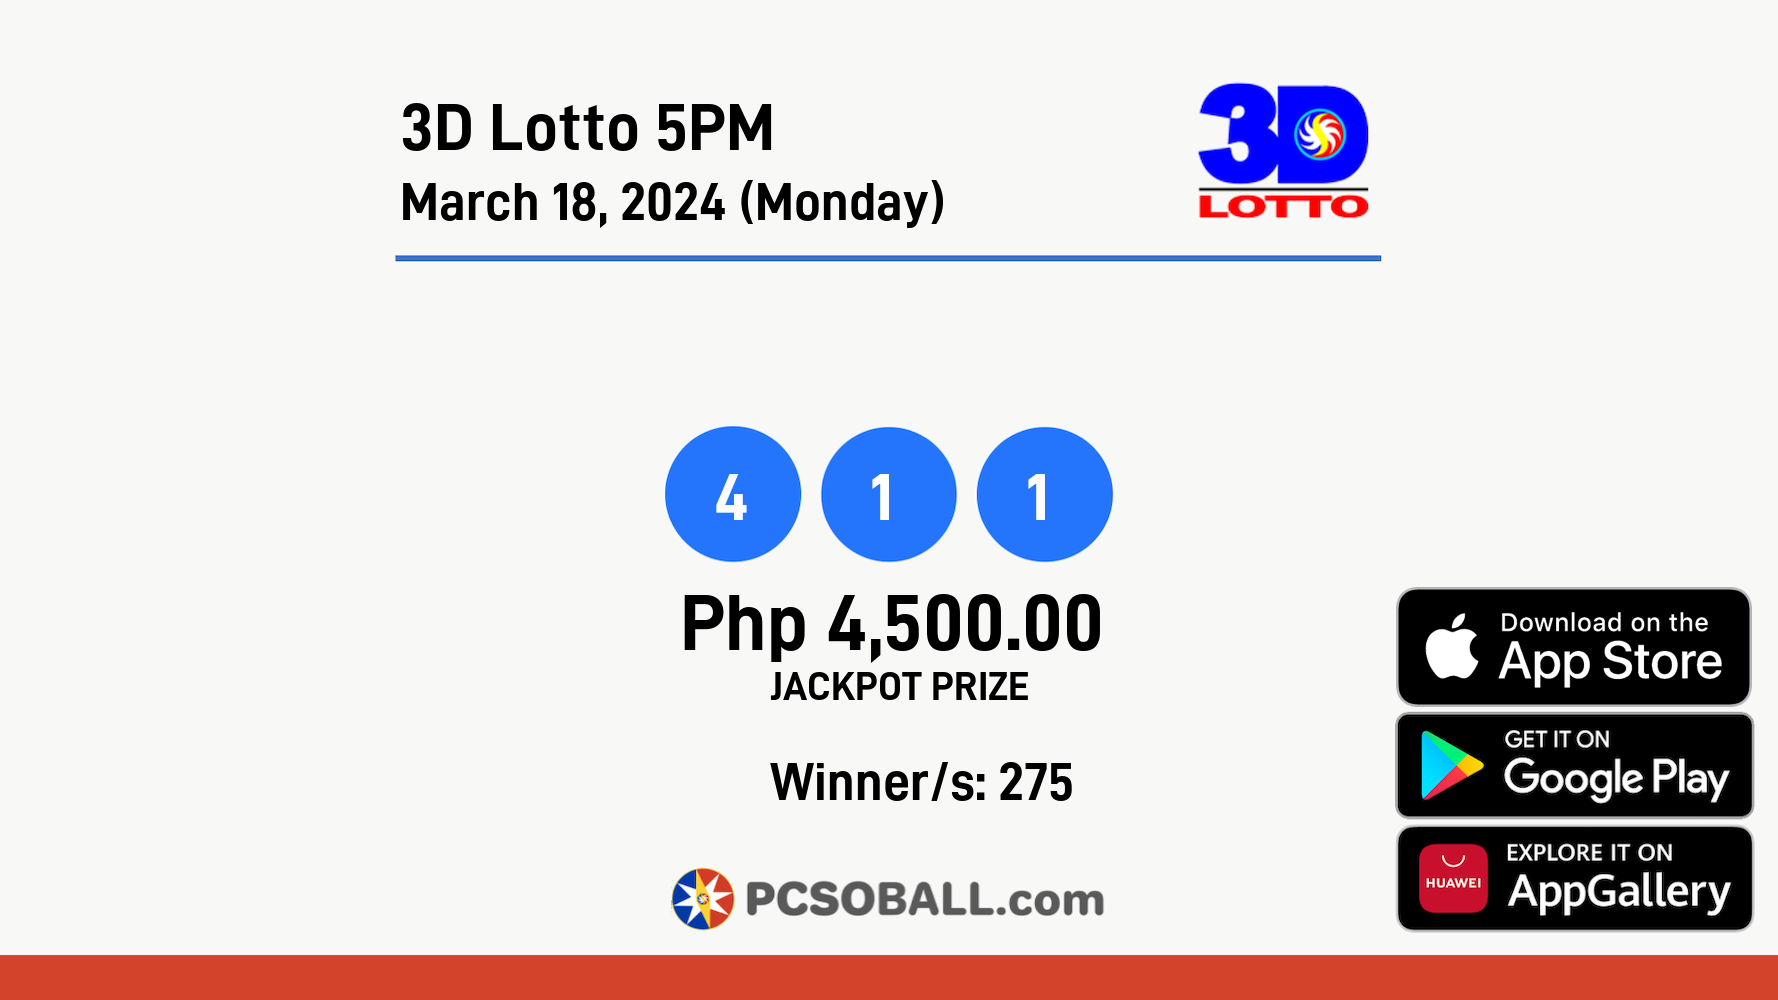 3D Lotto 5PM March 18, 2024 (Monday) Result